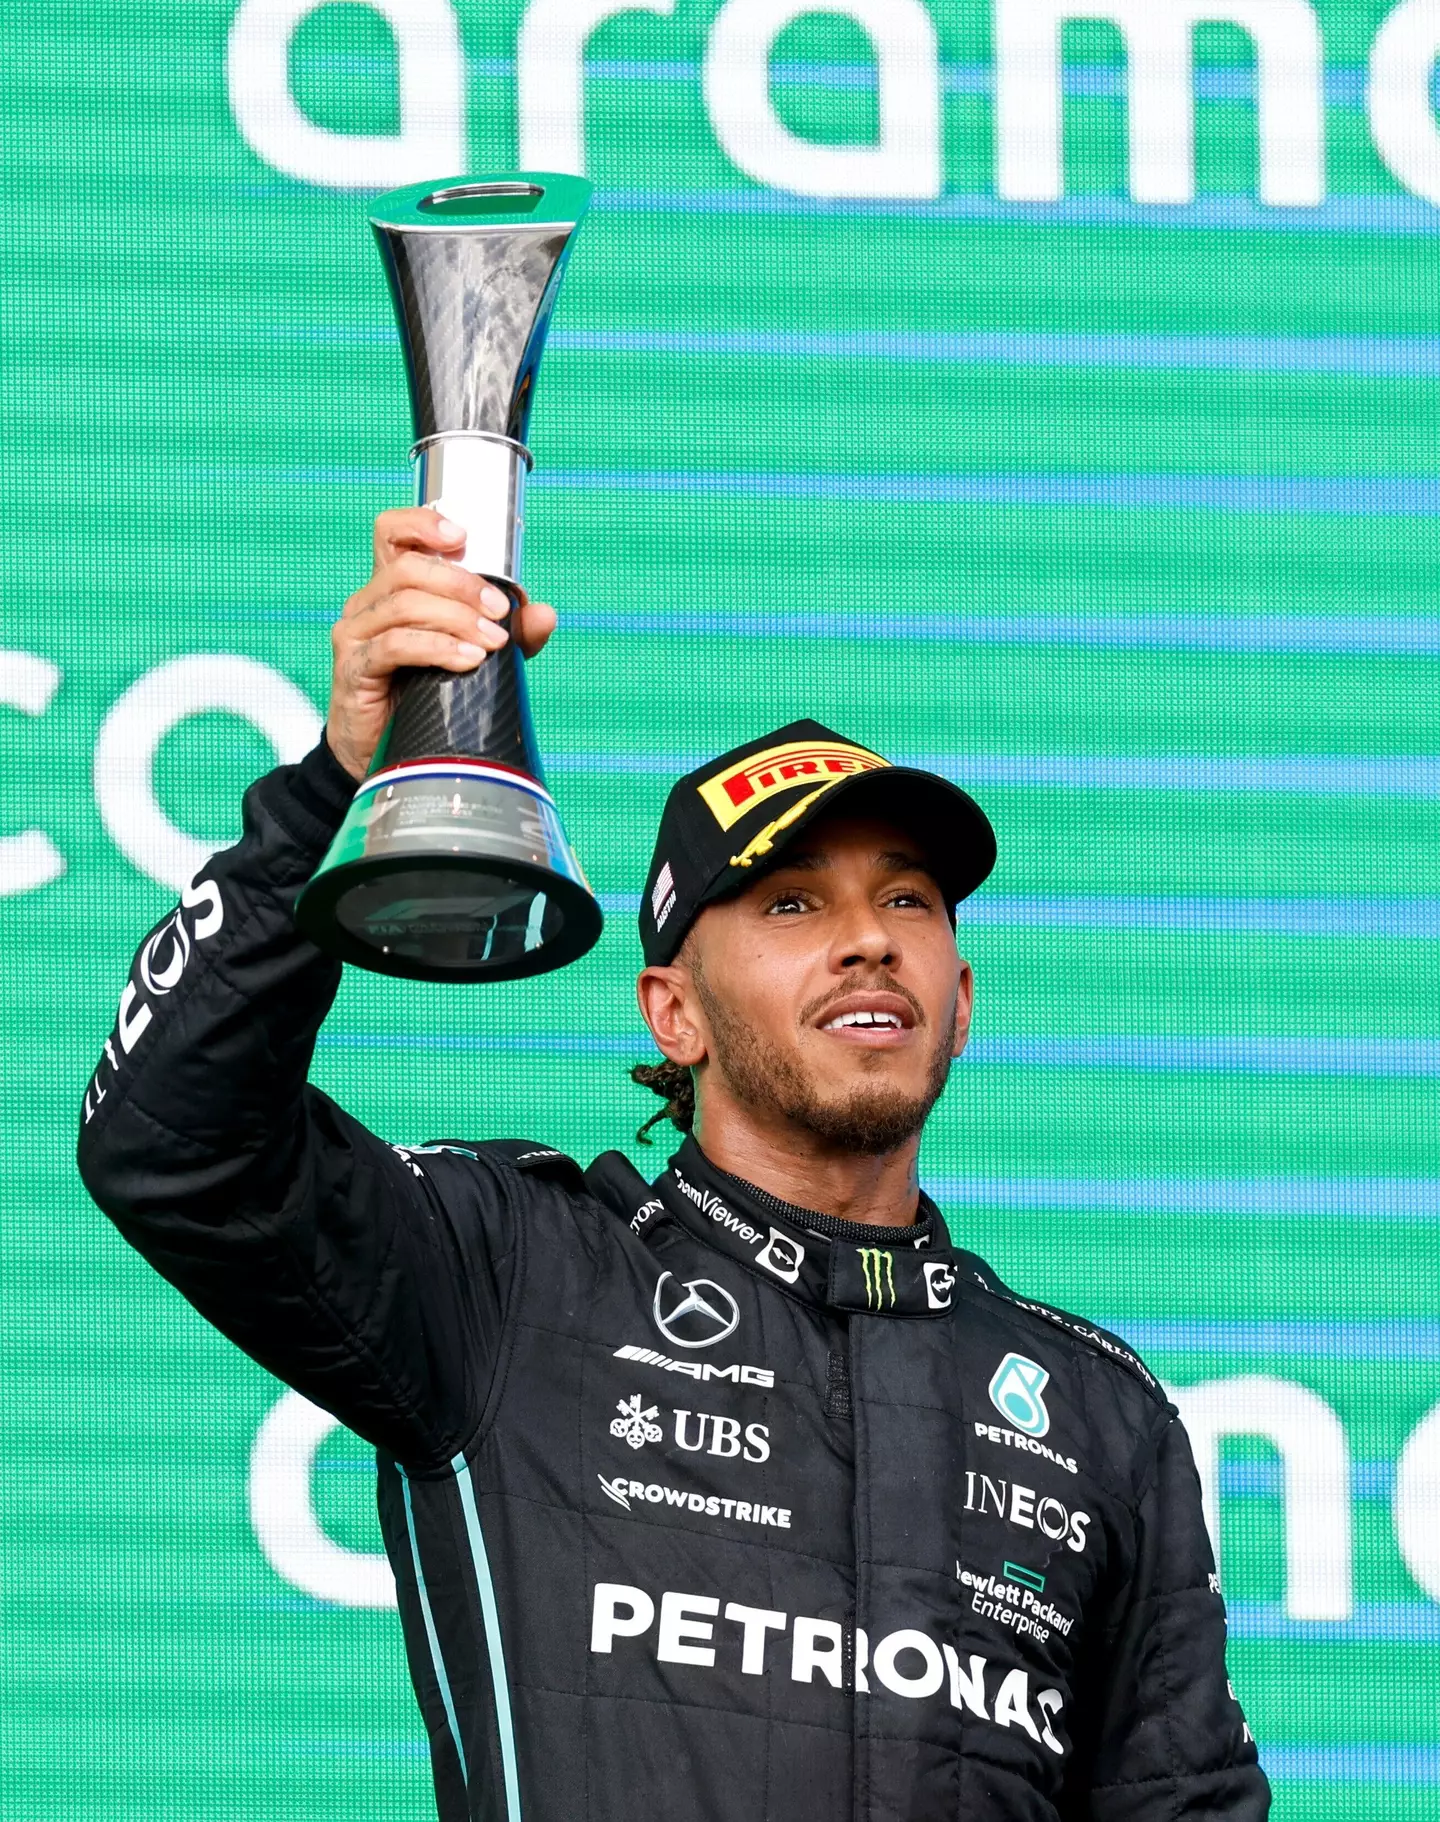 Lewis Hamilton has spoken out about the racist abuse he suffered as a child.